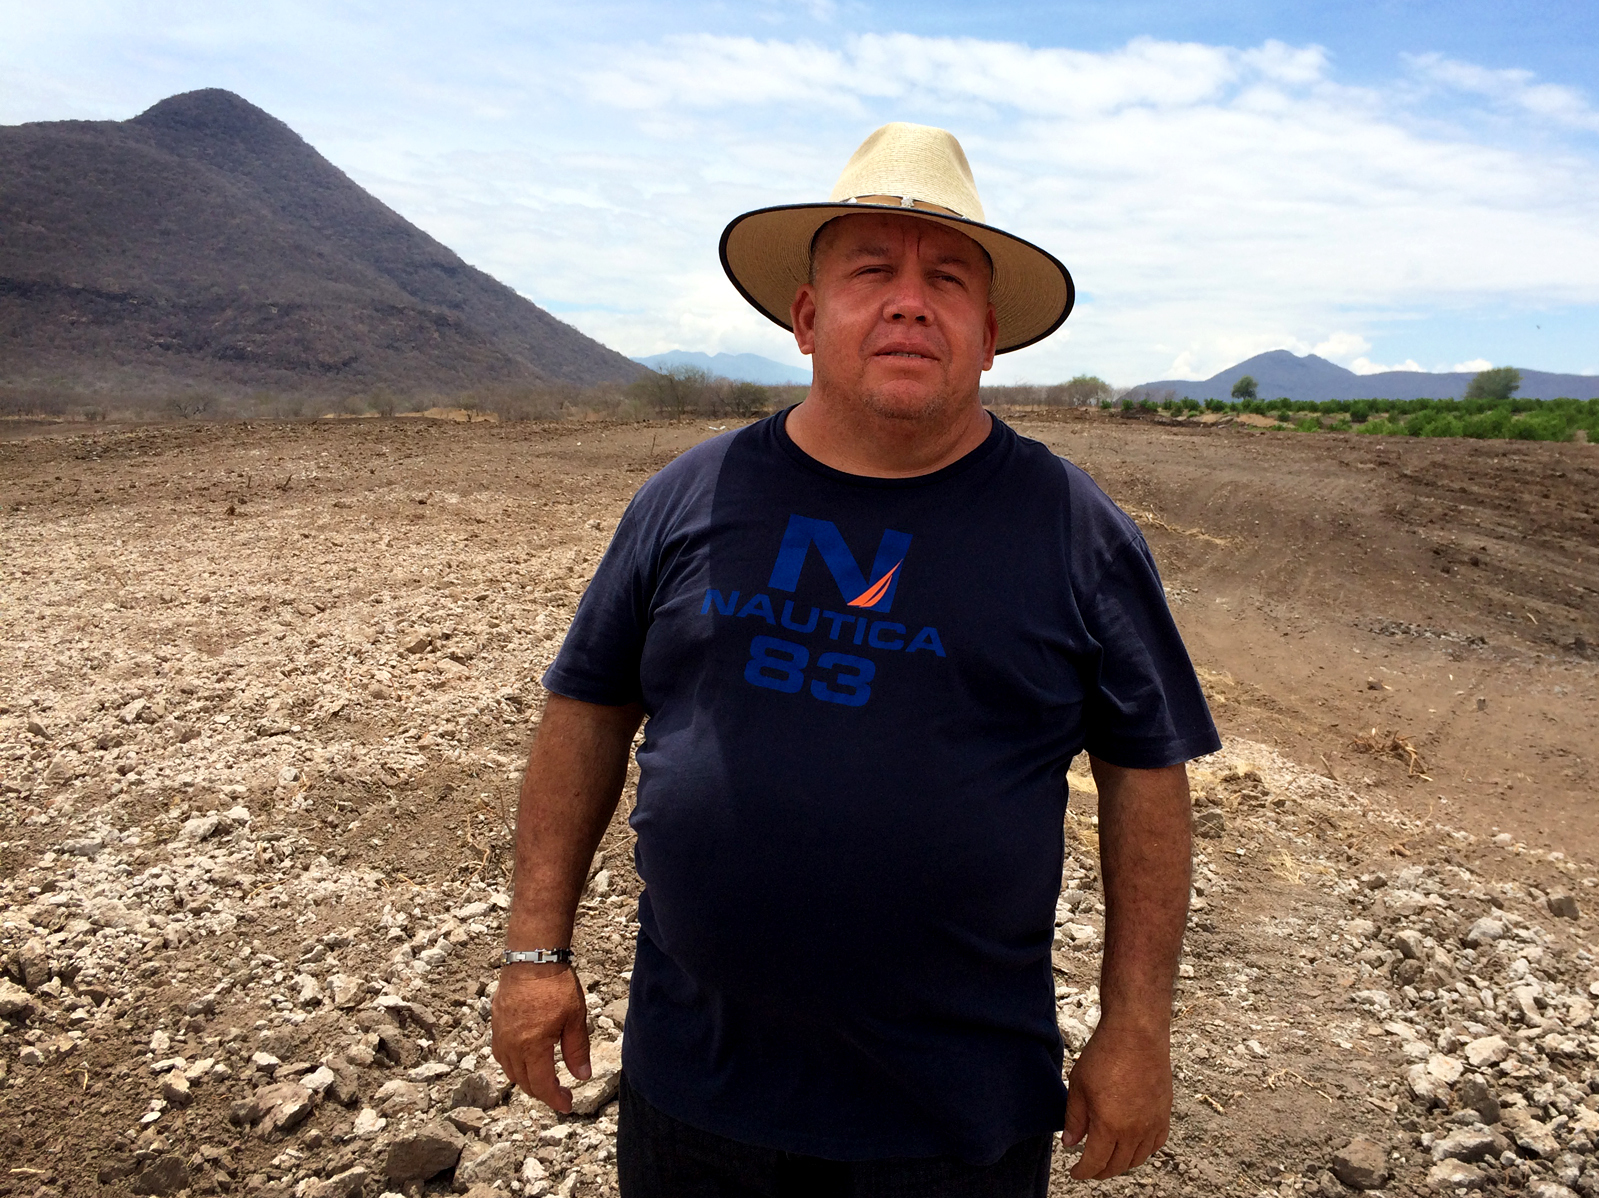 Farmer Efrain Hernandez Vazquez's profits this year will allow him to purchase 30 more acres and expand his lime operation. Photo: Carrie Kahn/NPR